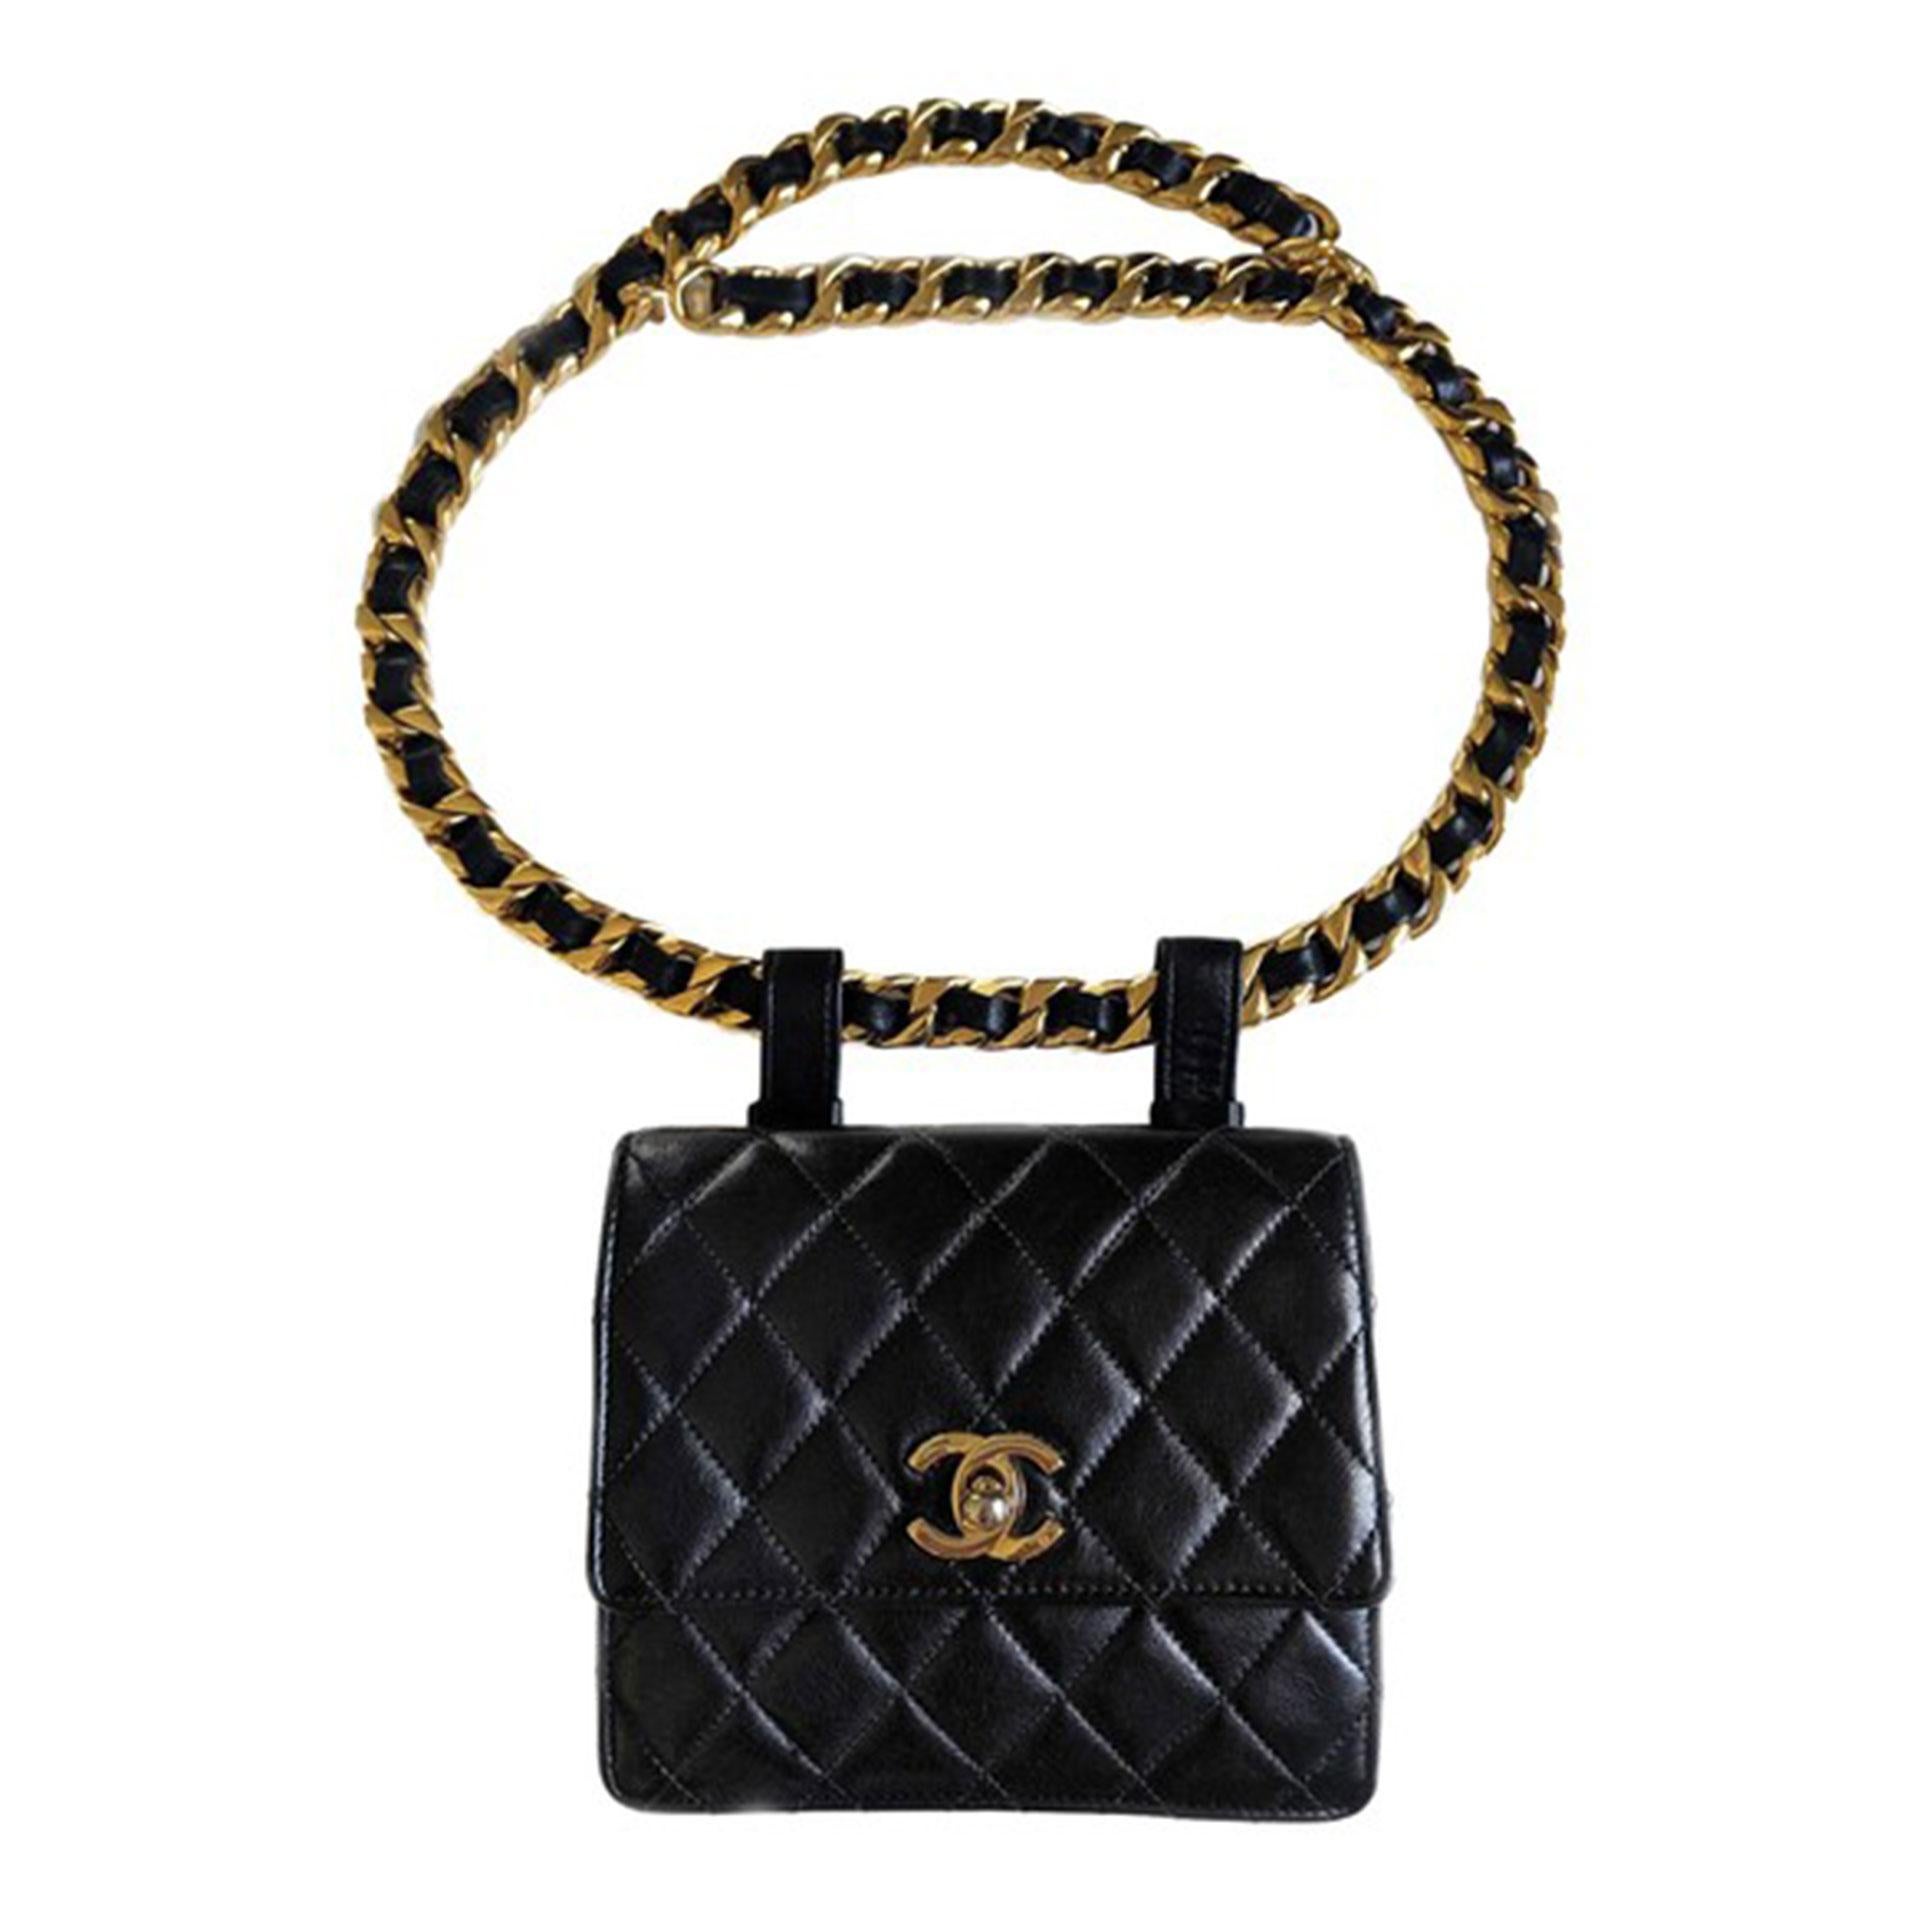 Chanel 1991 VERY RARE VINTAGE Waist Belt Bag Fanny Pack

Year: 1991 {VINTAGE 30 Years}
Gold Hardware
Quilted leather
Thick chain belt

Made in Italy